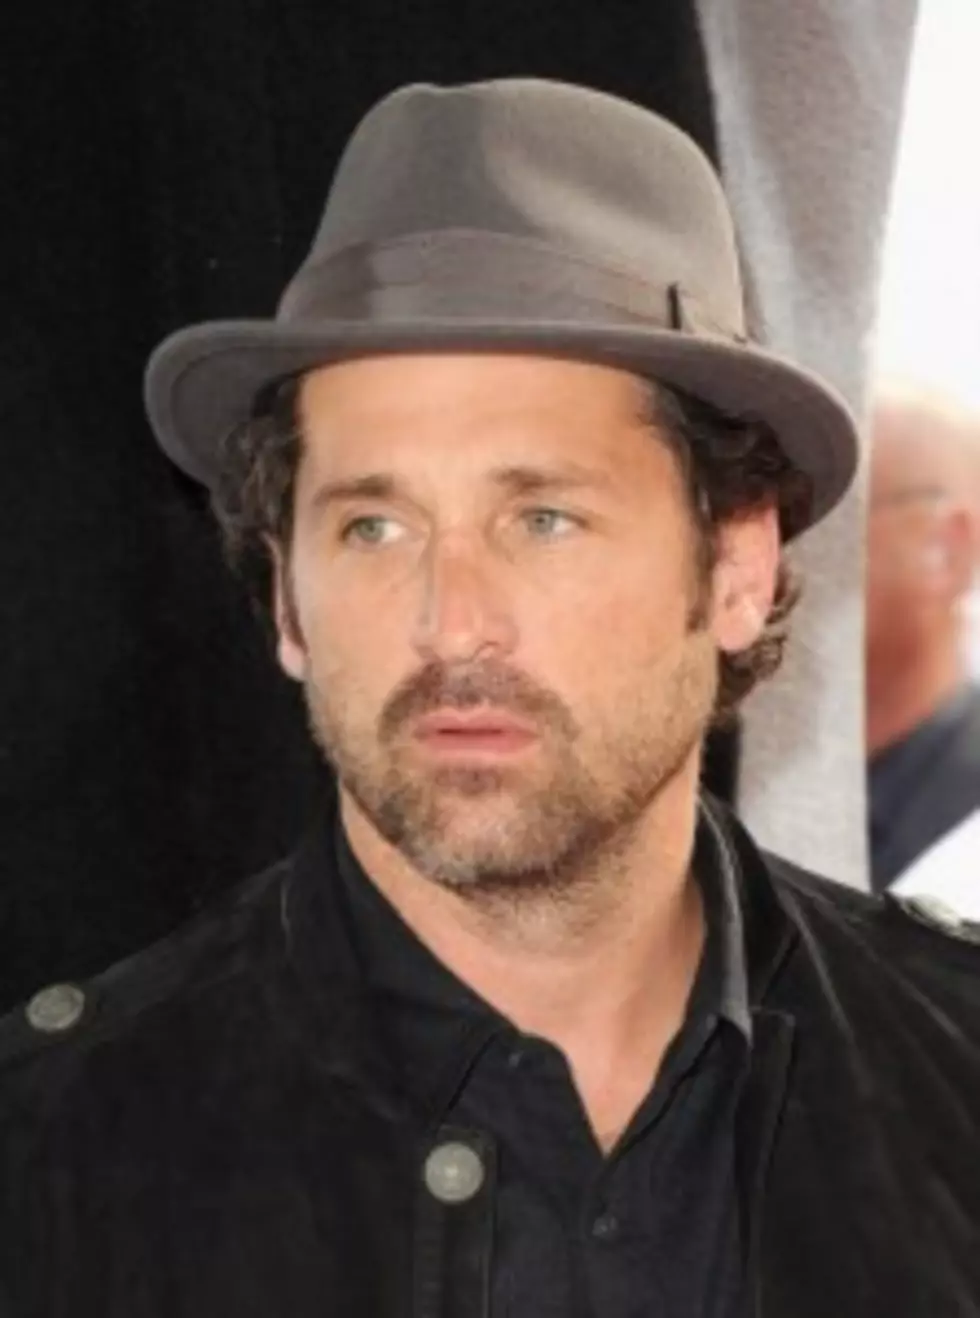 McDreamy To The Rescue!  Patrick Dempsey Rescues Teen!